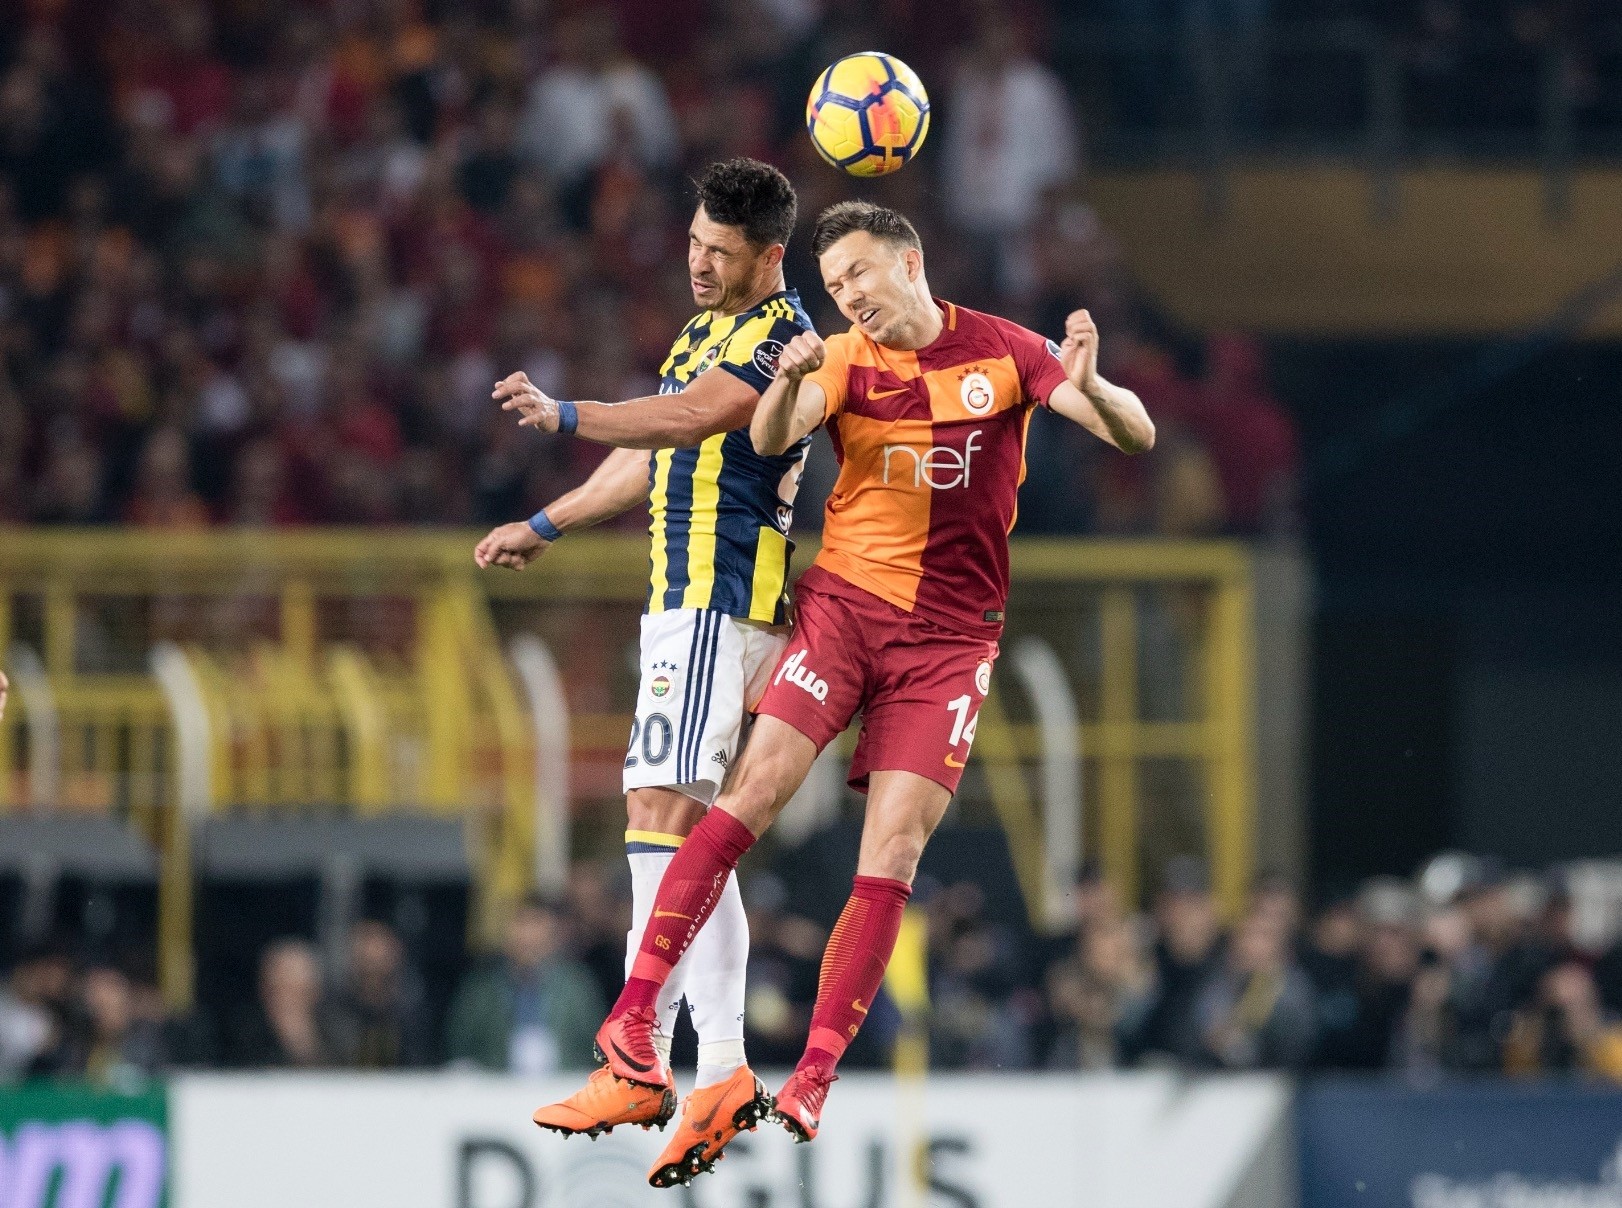 Fenerbahu00e7e's Giuliano Victor De Paula (L) in action against Galatasaray's Martin Linnes during their Super League match in Istanbul.